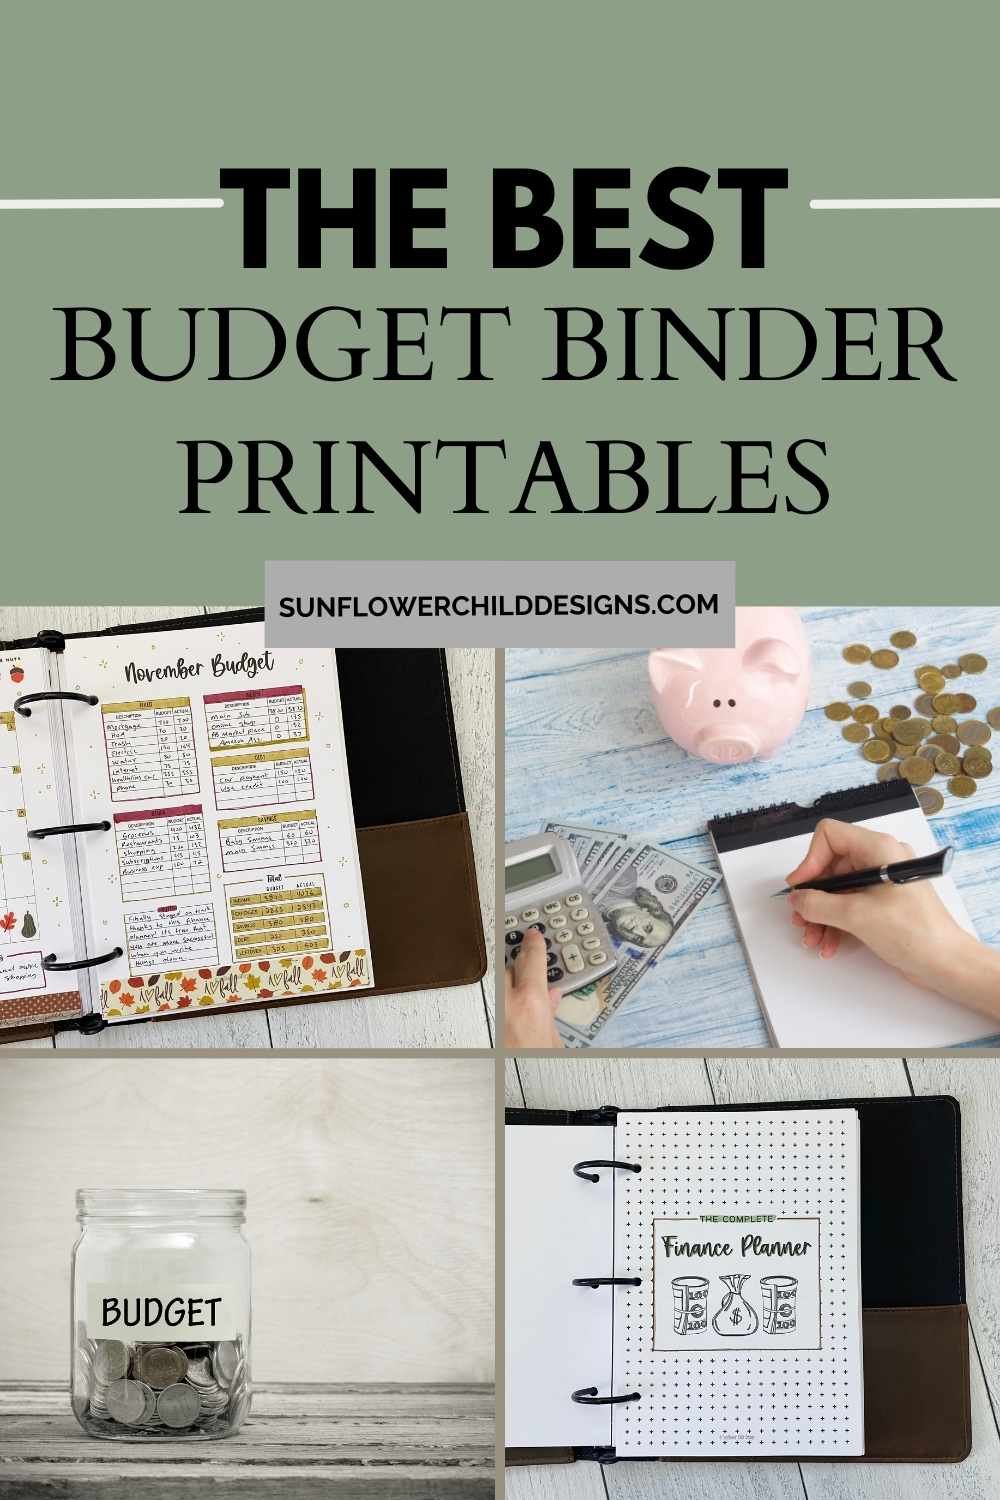 Master Your Finances with Our Ultimate Budget Binder: For Lifelong Money Management!